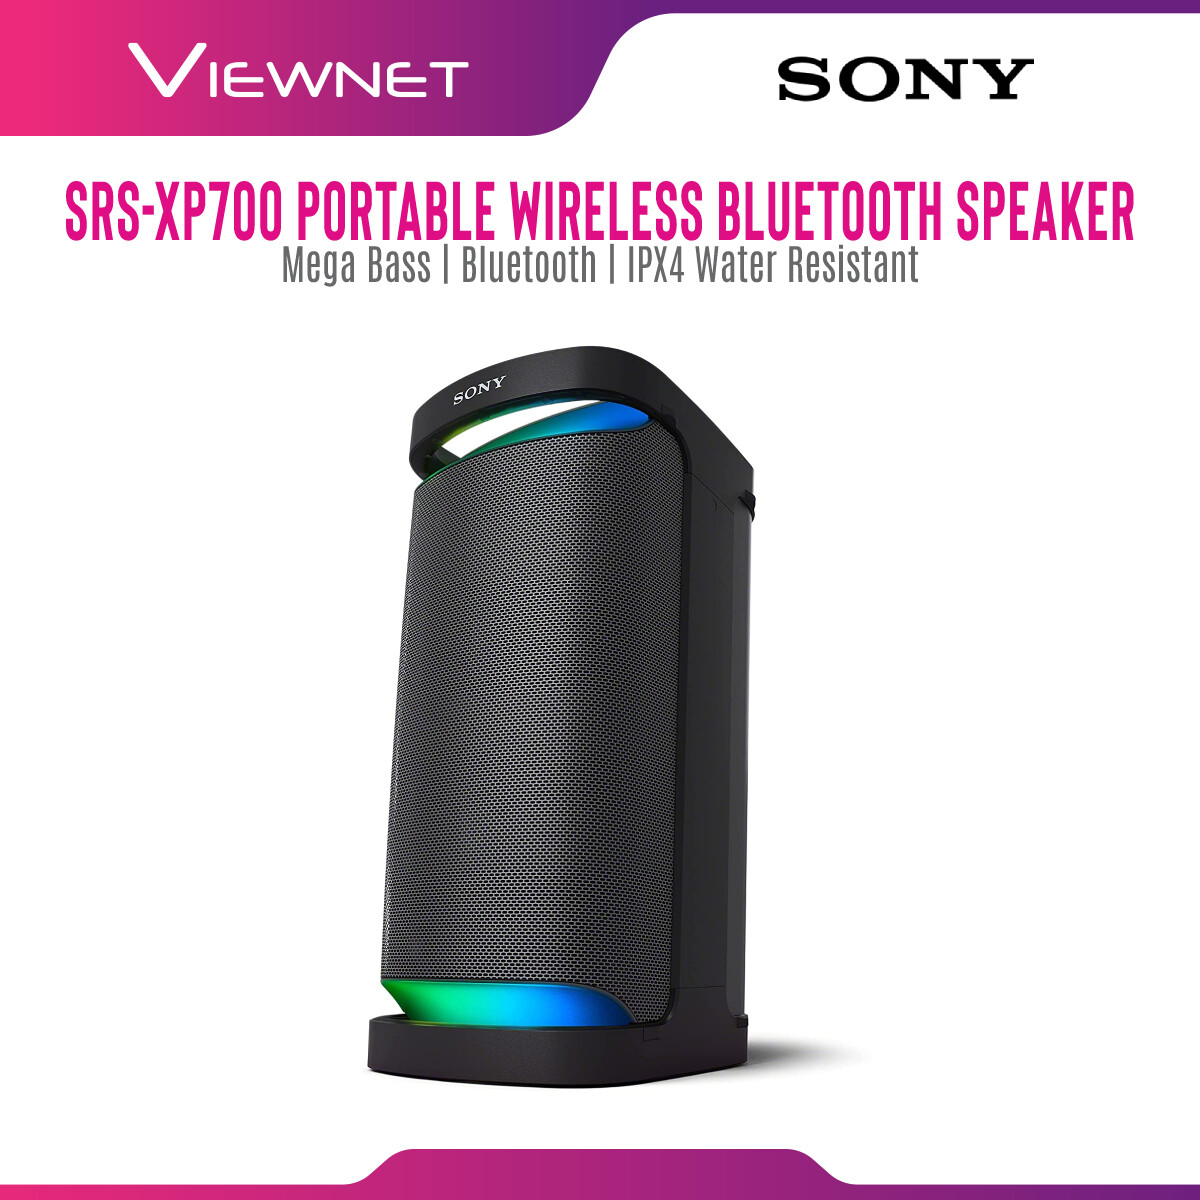 [PRE-ORDER] [NEW LAUNCH] Sony SRS-XP700 Series Portable Wireless Bluetooth Speaker with Extra Bass , IPX Water Resistant + (Free Gifts: F-V120 Microphone + RM50 Starbucks Card(While Stock Last ) (ETA: 2021-08-04)